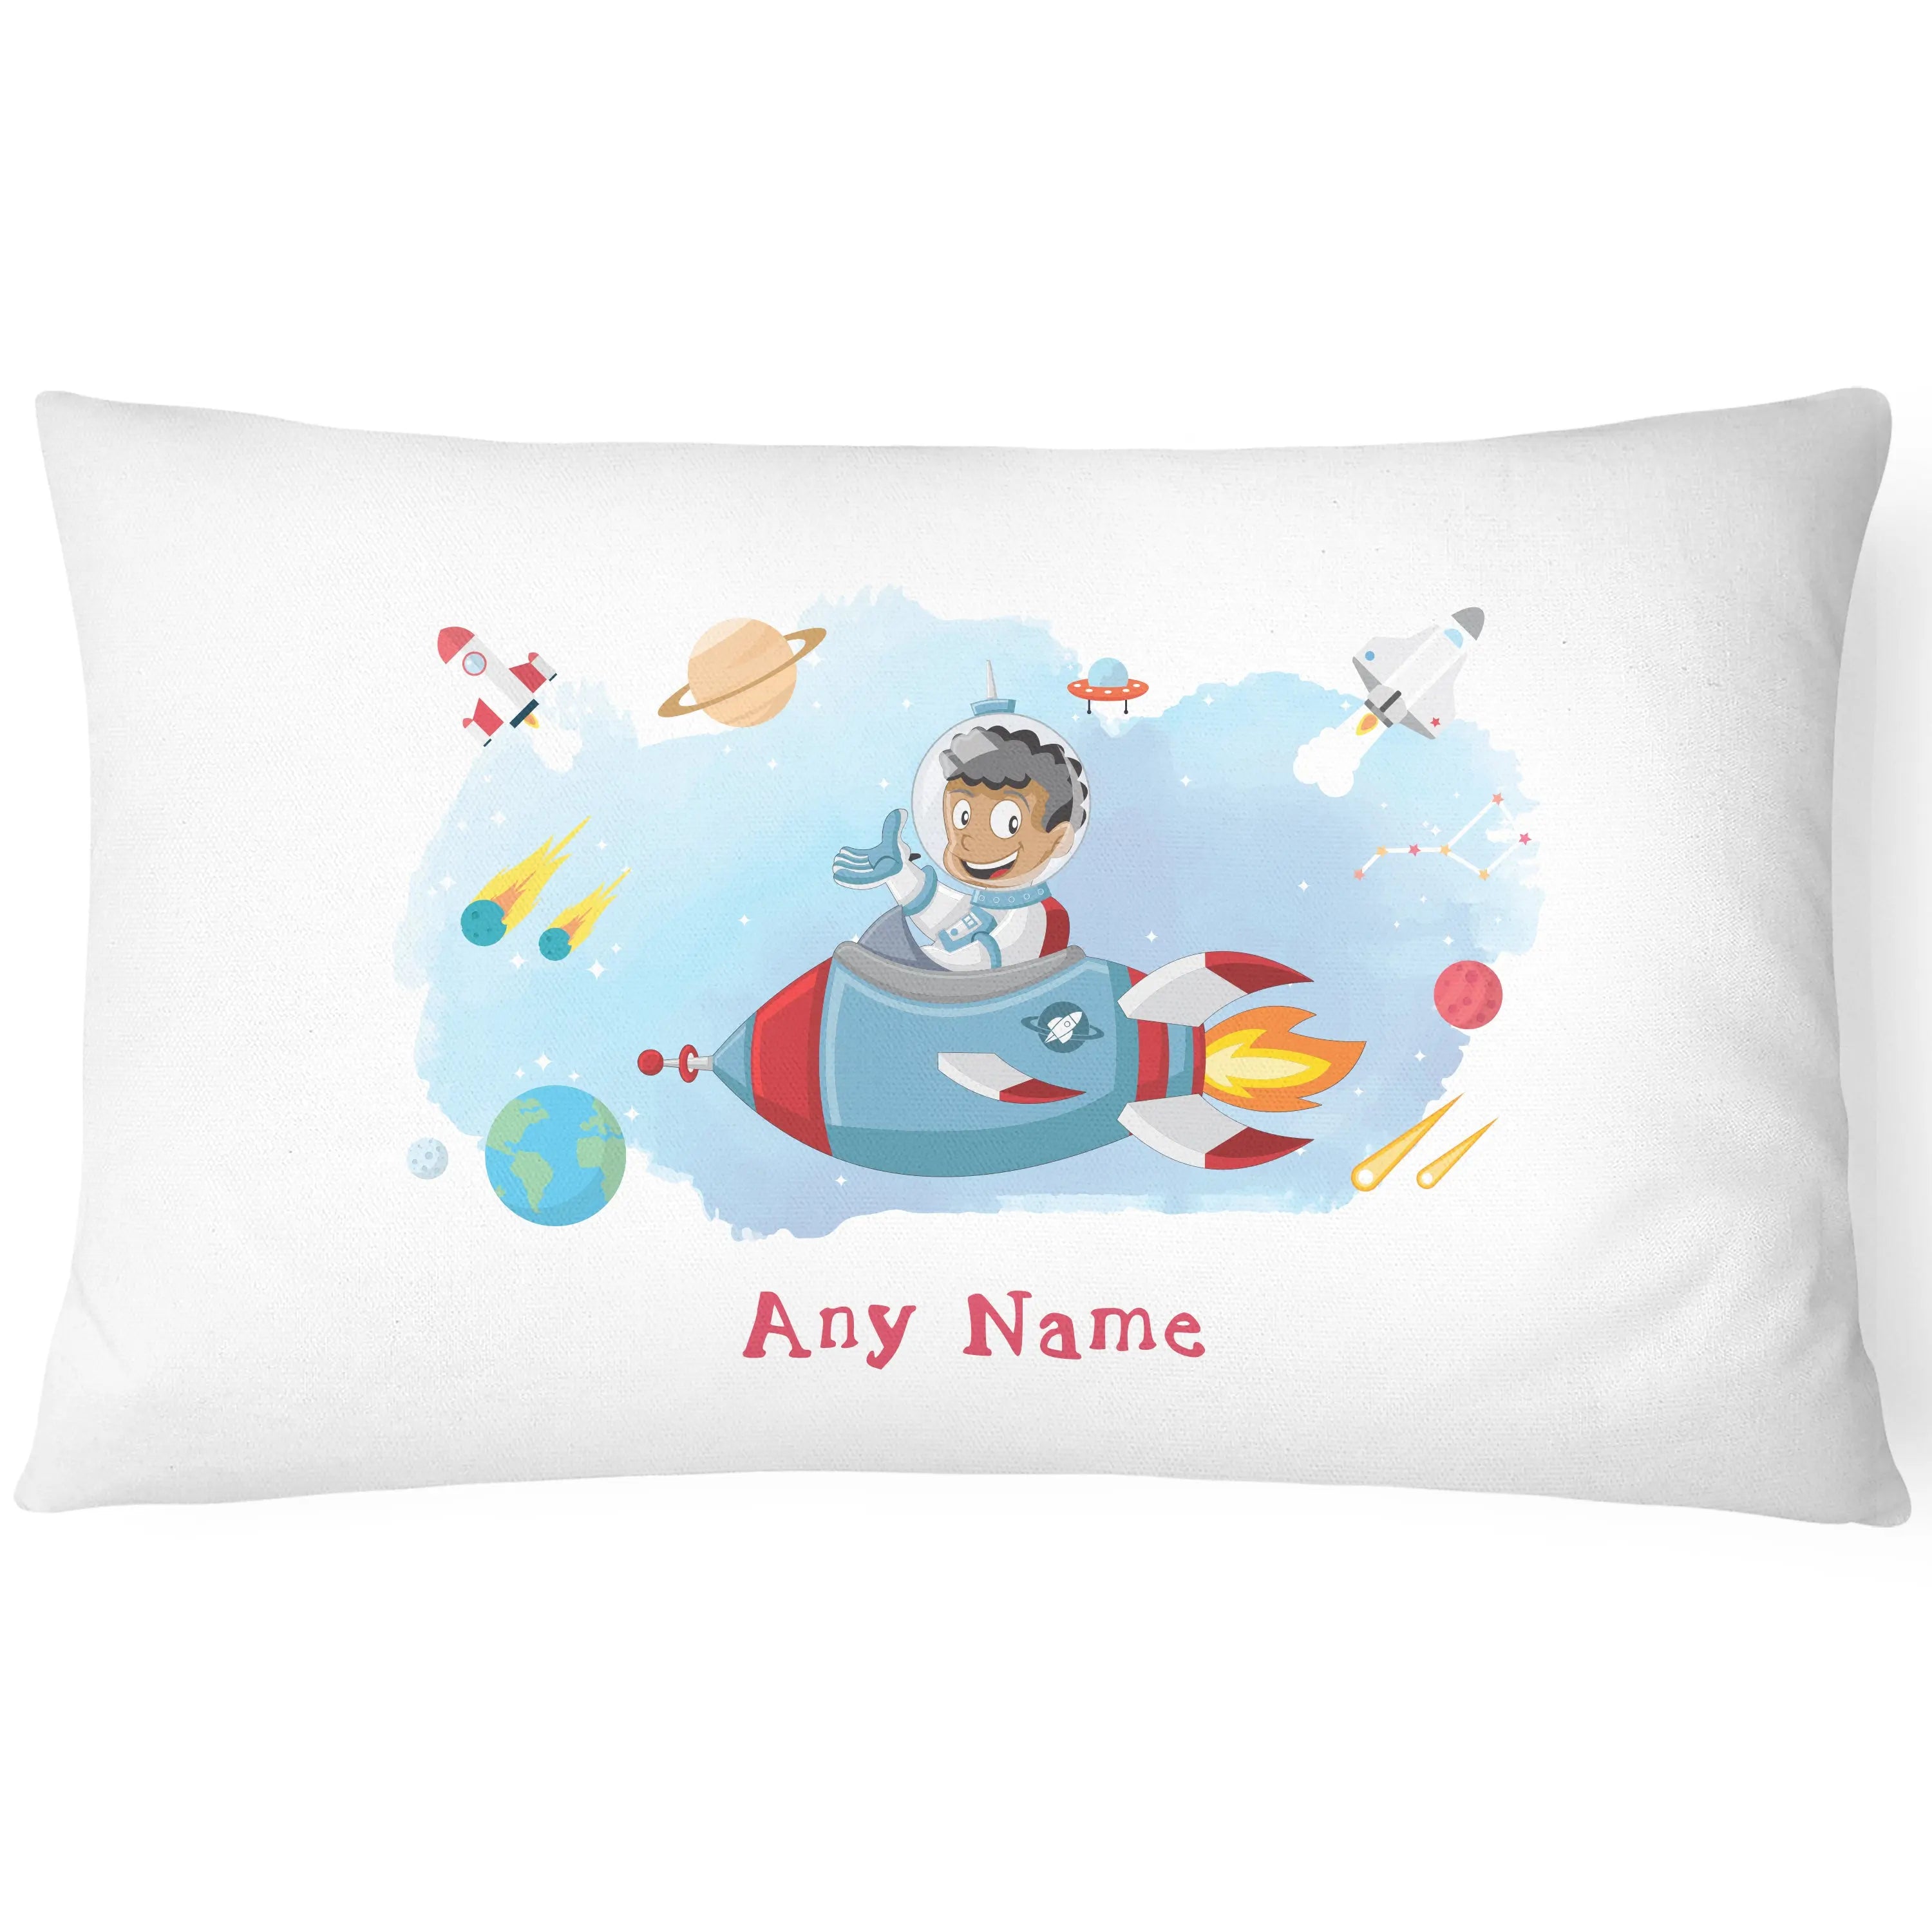 Space Pillowcase for Kids - Personalise With Any Name - Light Speed - CushionPop